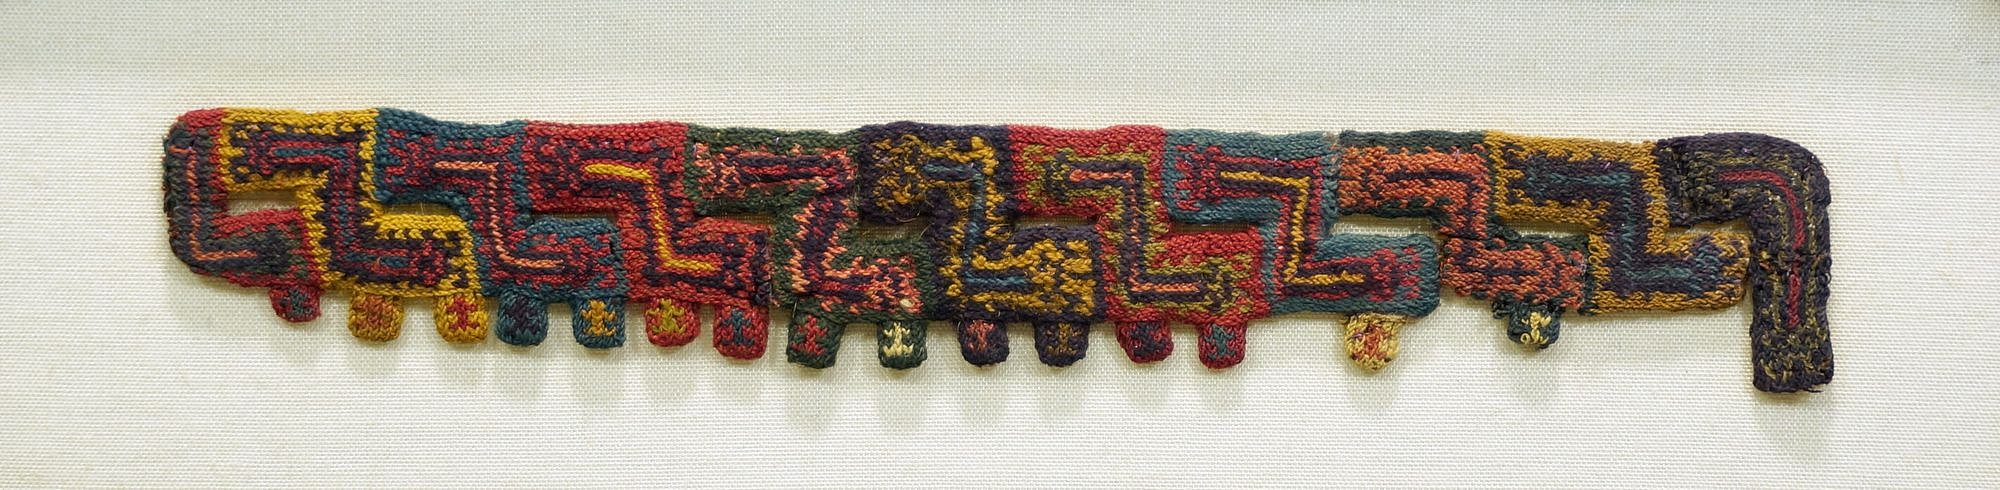 Peru, Paracas Miniature Knitted Fringe or Neck Opening with Double-Headed Worms
Eleven finely knitted colorful segments depicting double-headed worms with curled tails in alternating colors.  Below each worm is a small tab with an even smaller creature nested within.  Acquired from the estate of Anton Roeckl in Germany prior to 1970.
Media: Textile
Dimensions: Length: 6 3/4 inches
$2,800
96165